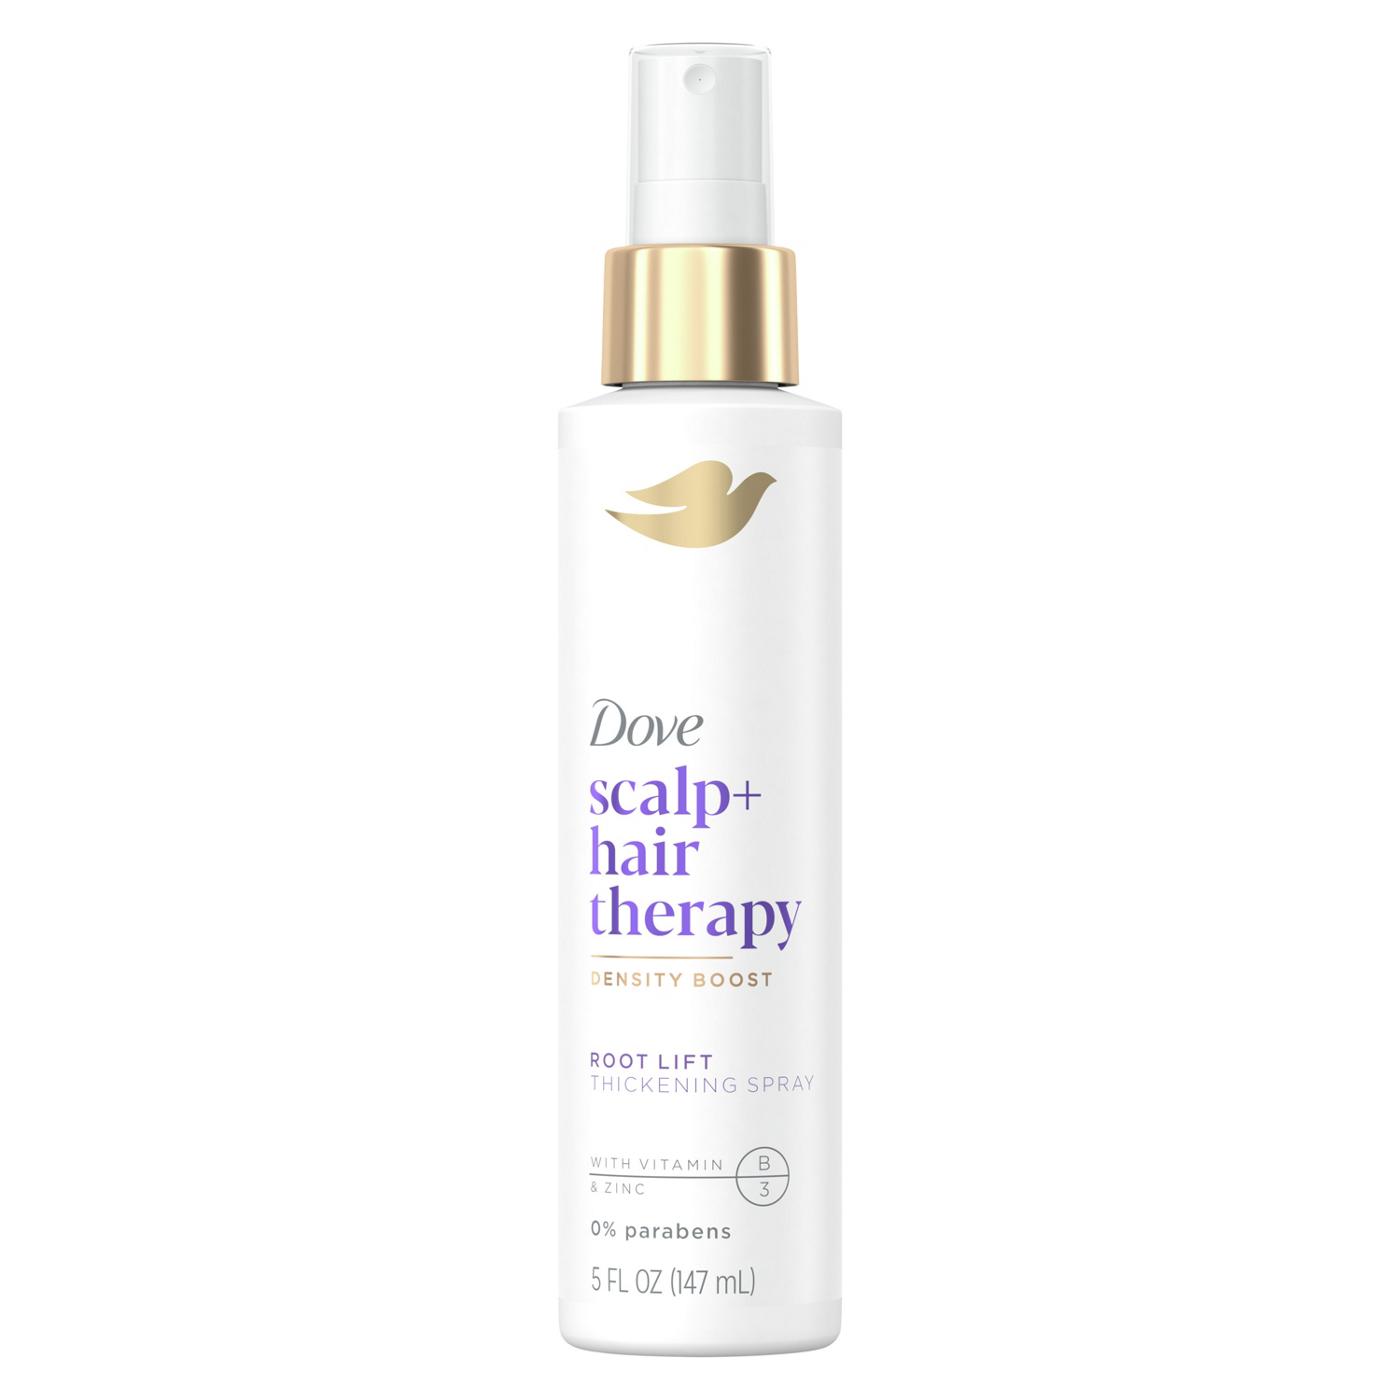 Dove Scalp+ Hair Therapy Thickening Spray; image 1 of 5